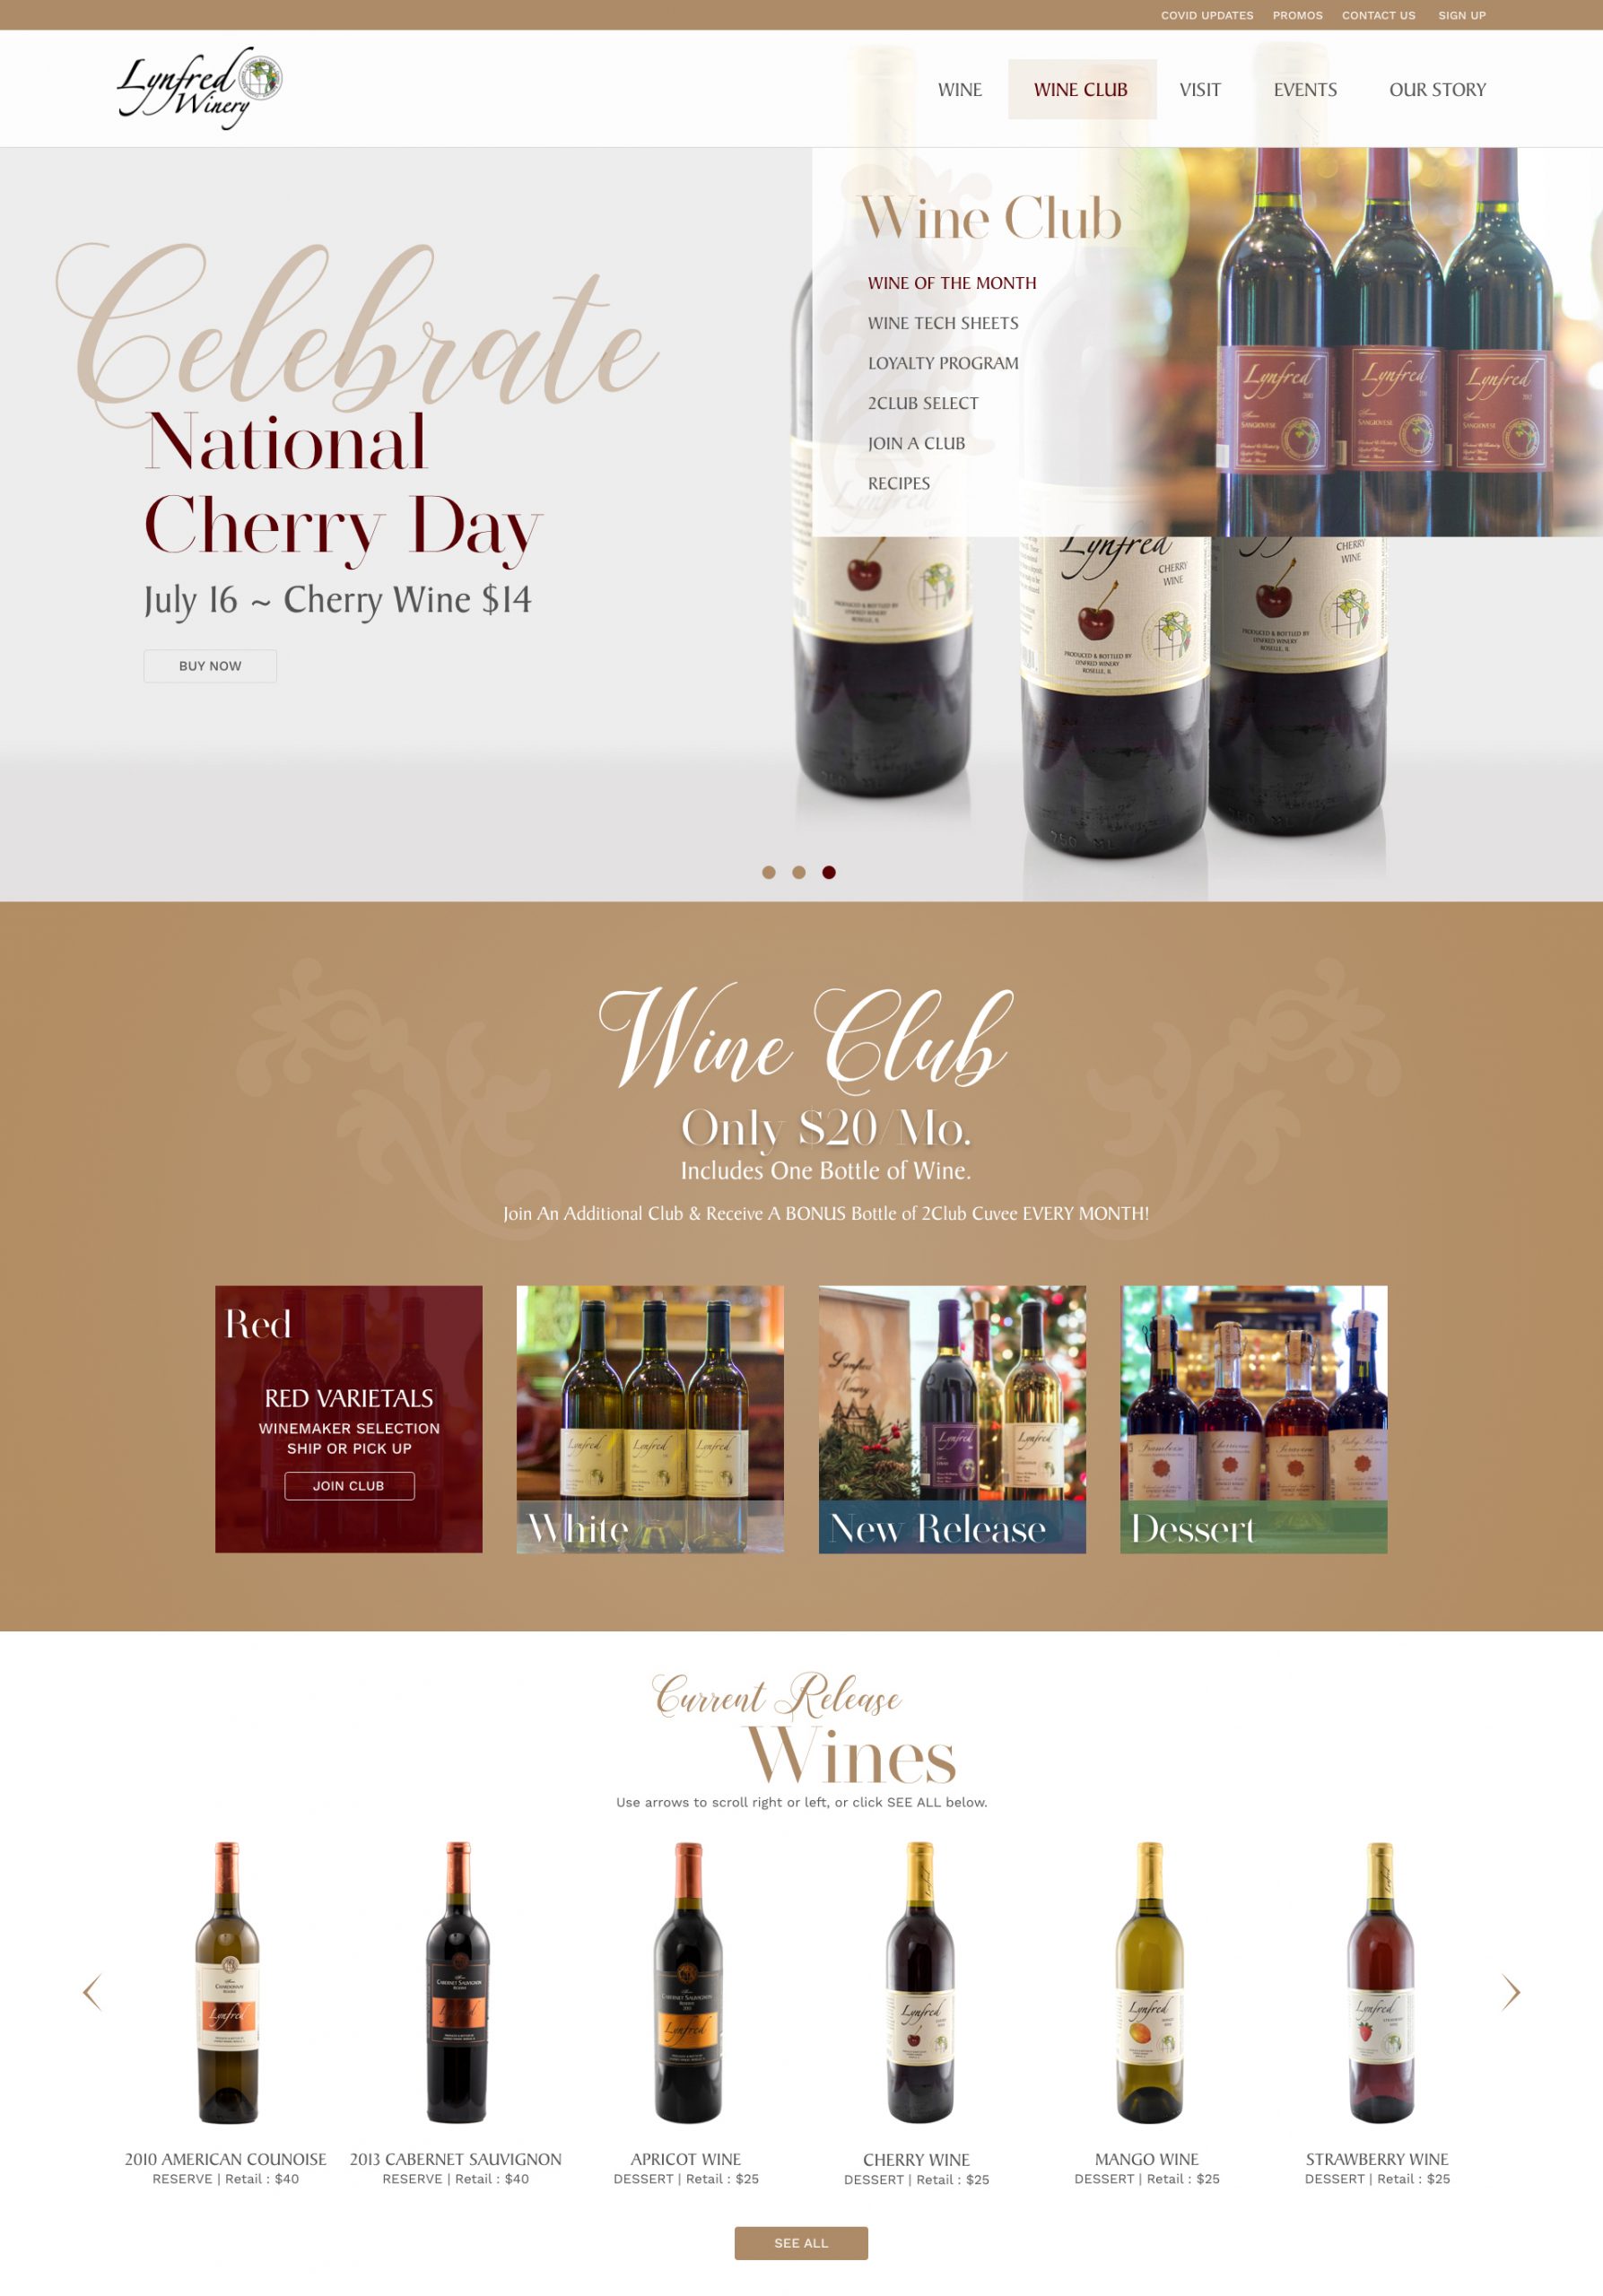 Lynfred Winery Website Redesign - After